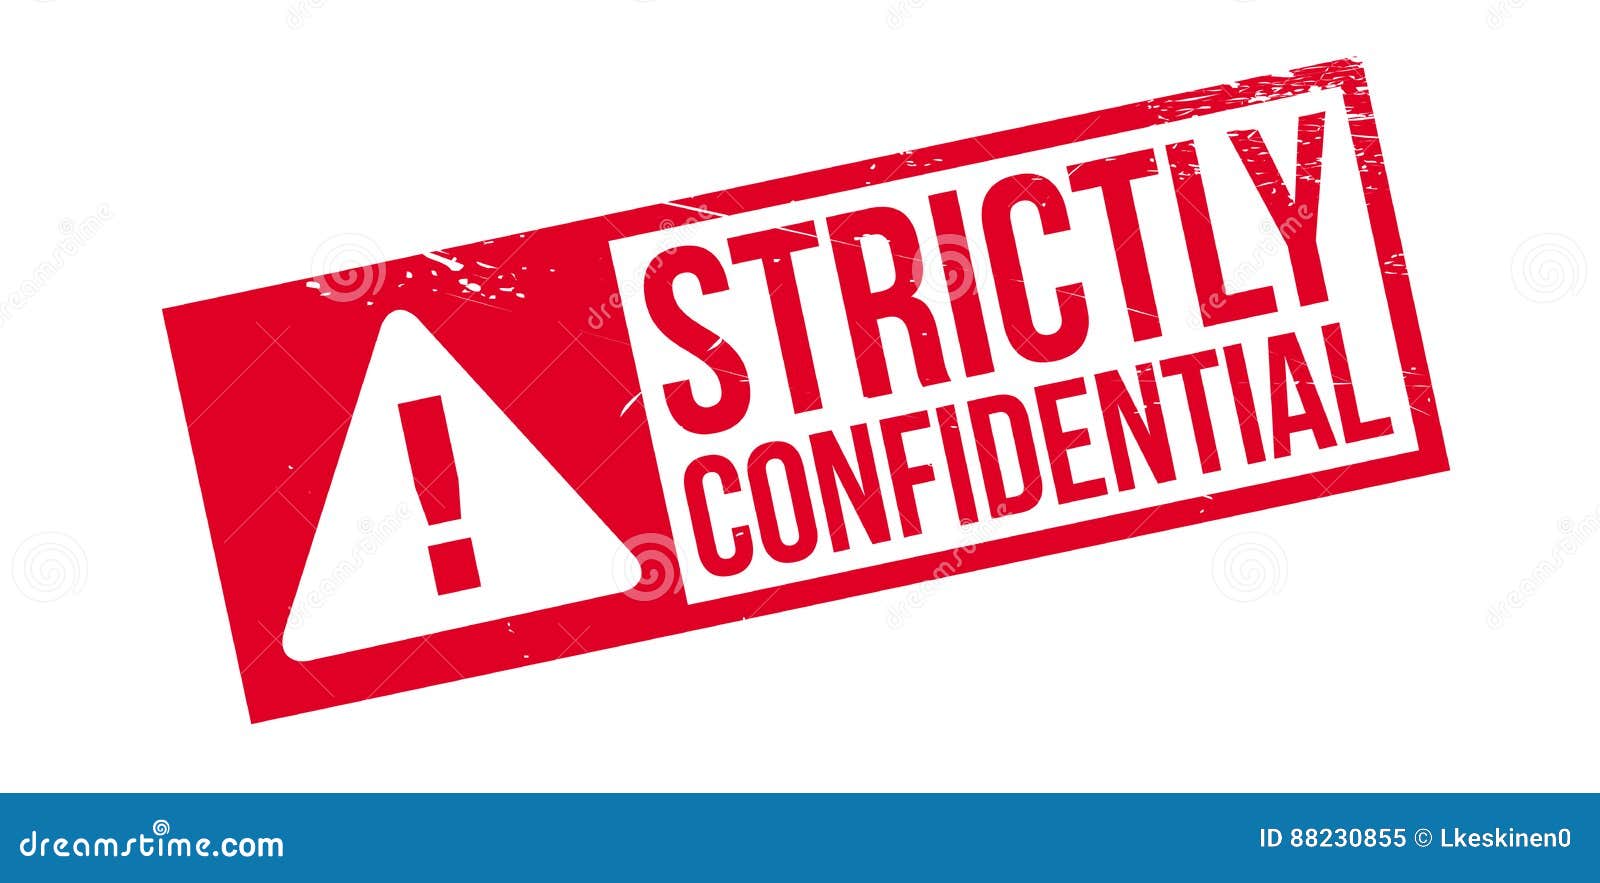 strictly confidential rubber stamp